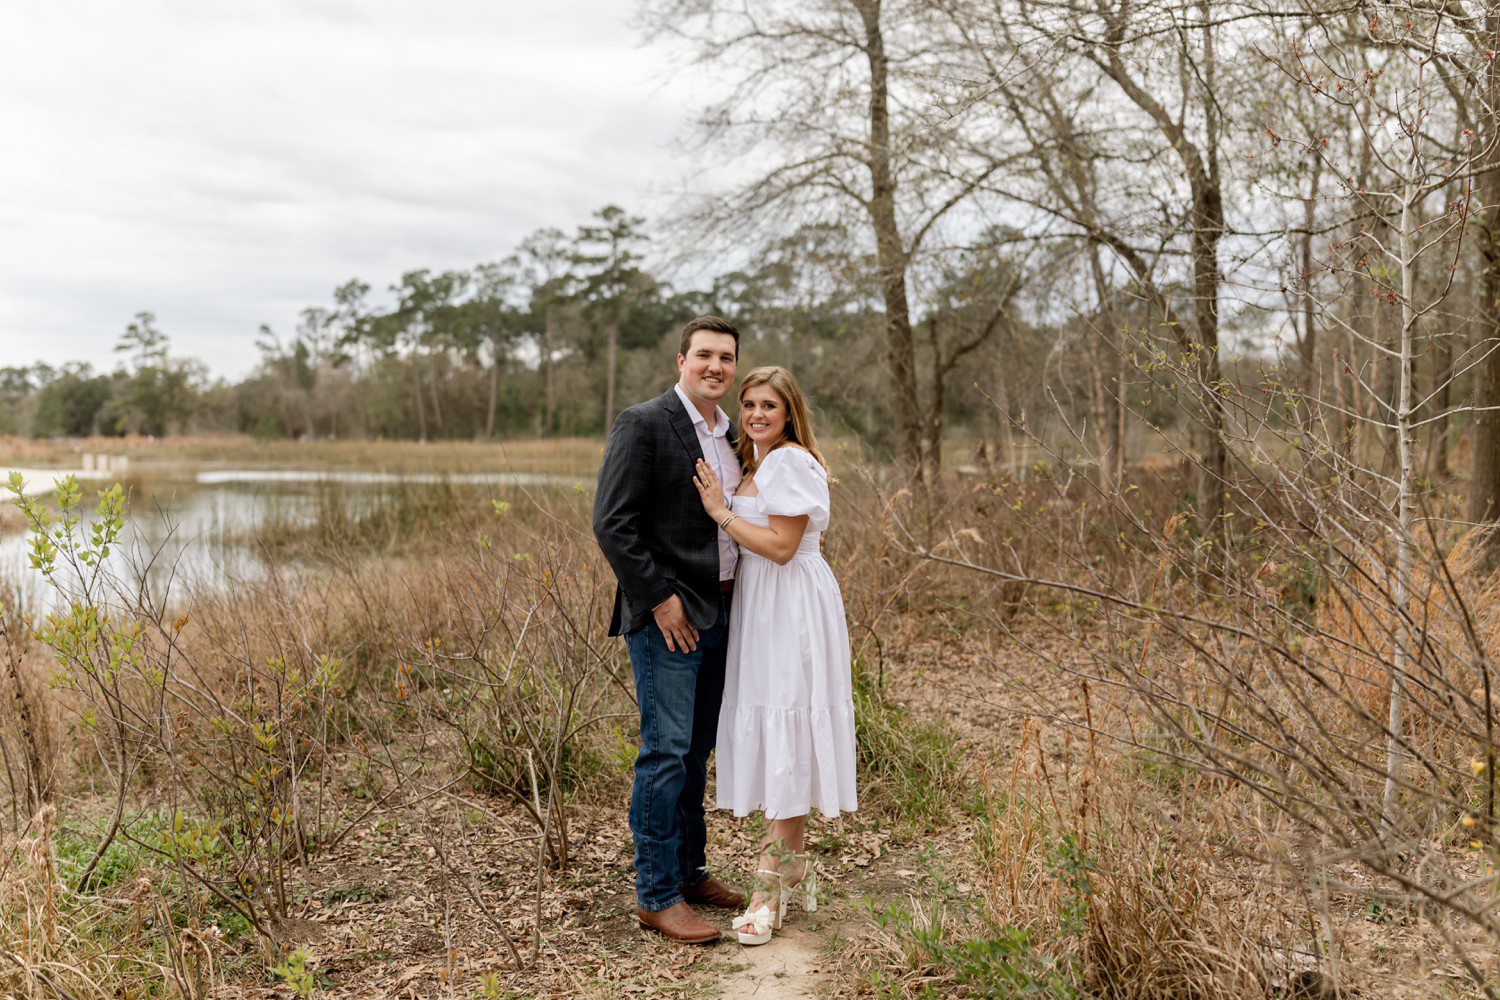 Engagement Photos at Eastern Glades in Memorial Park Houston 